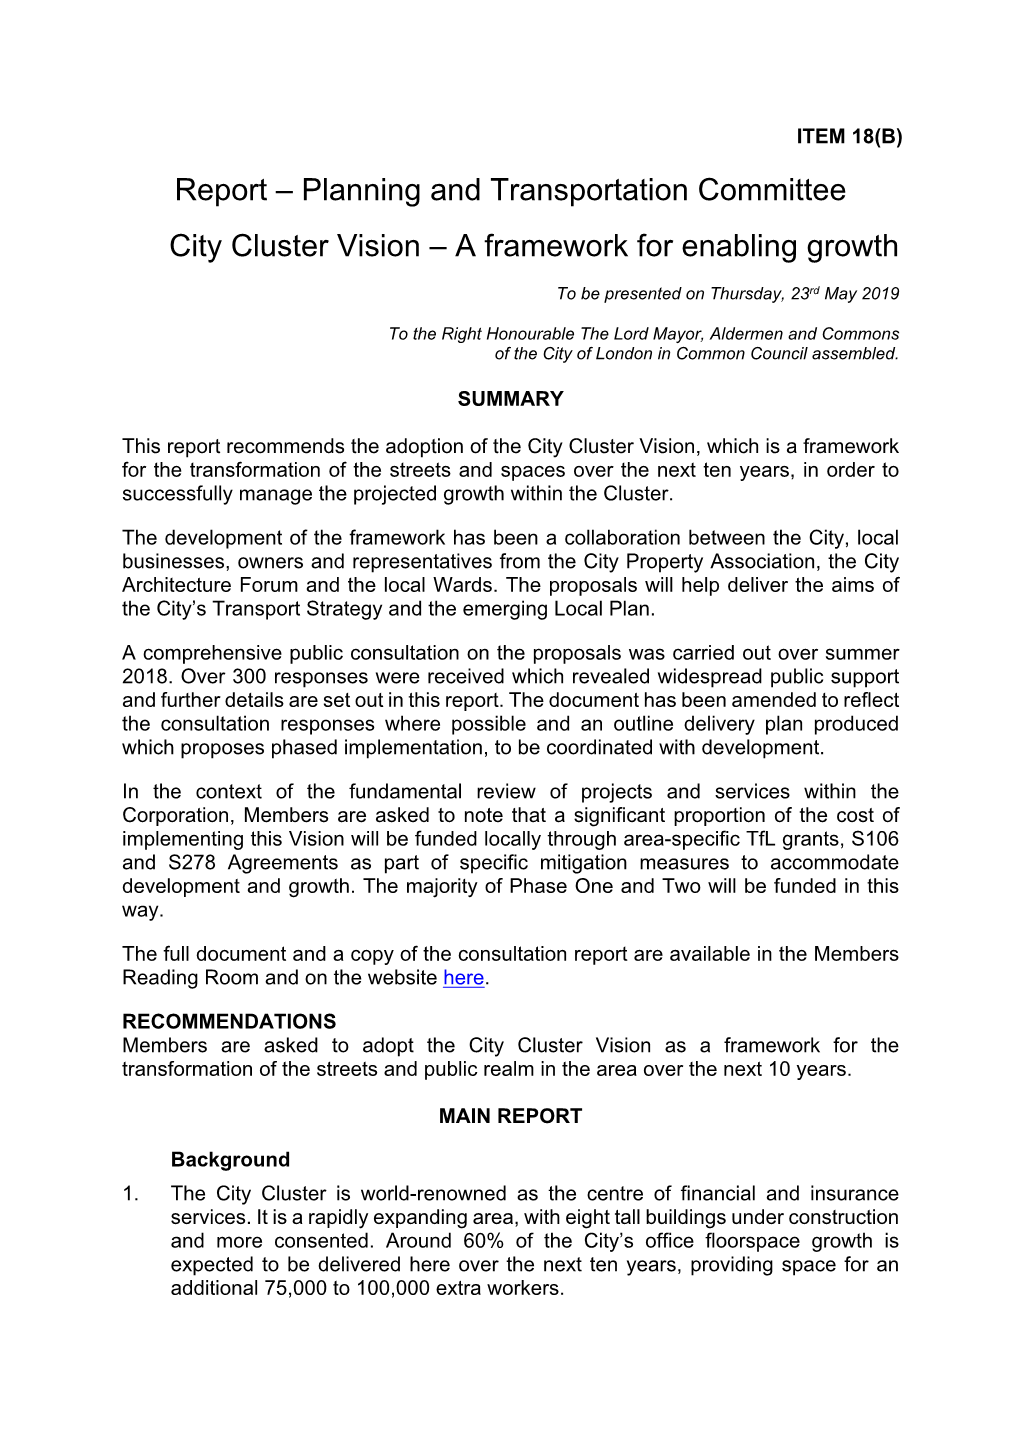 Planning and Transportation Committee City Cluster Vision – a Framework for Enabling Growth